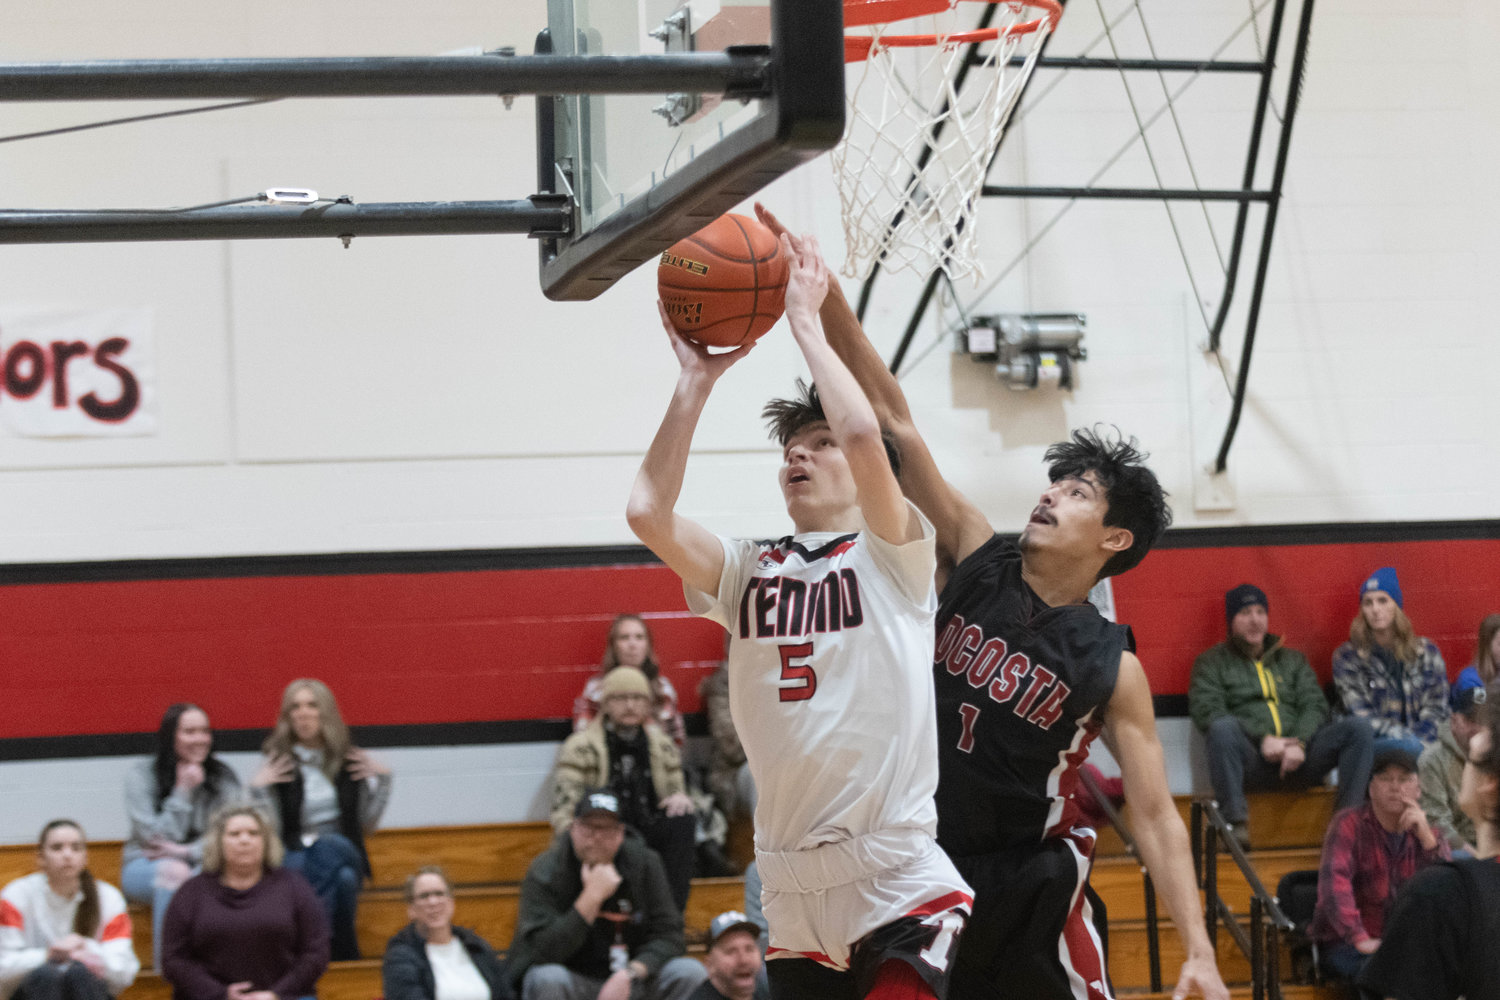 Noah Schow goes up to the rim past a defender during the first quarter of Tenino's game against Ocosta on Dec. 21.